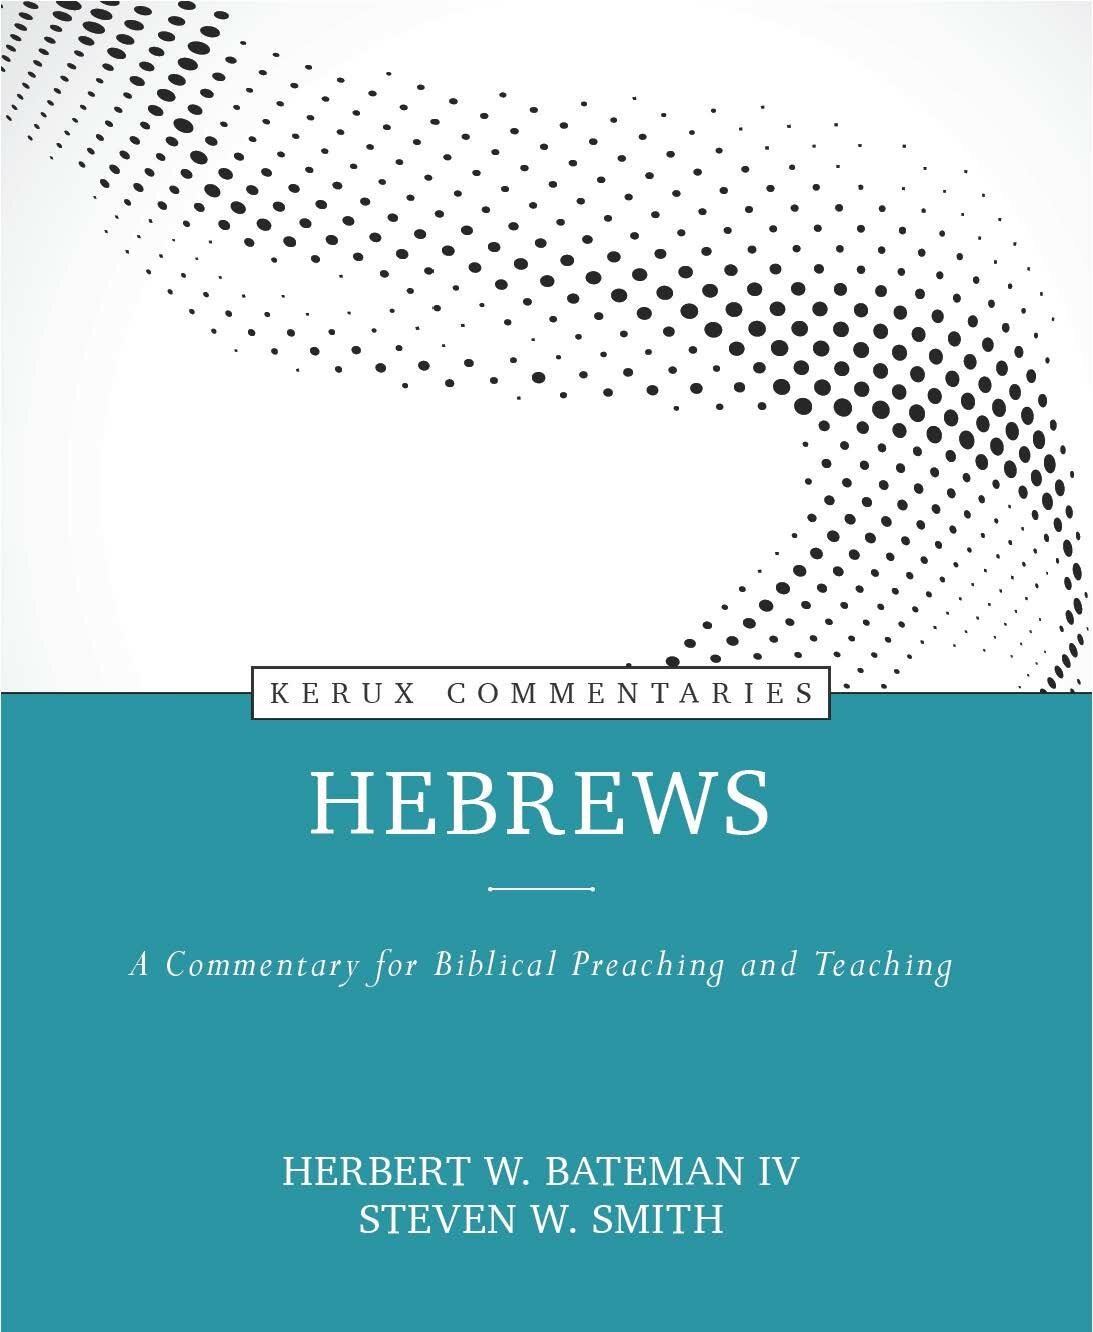 Hebrews: A Commentary for Biblical Preaching and Teaching (Kerux Commentaries)